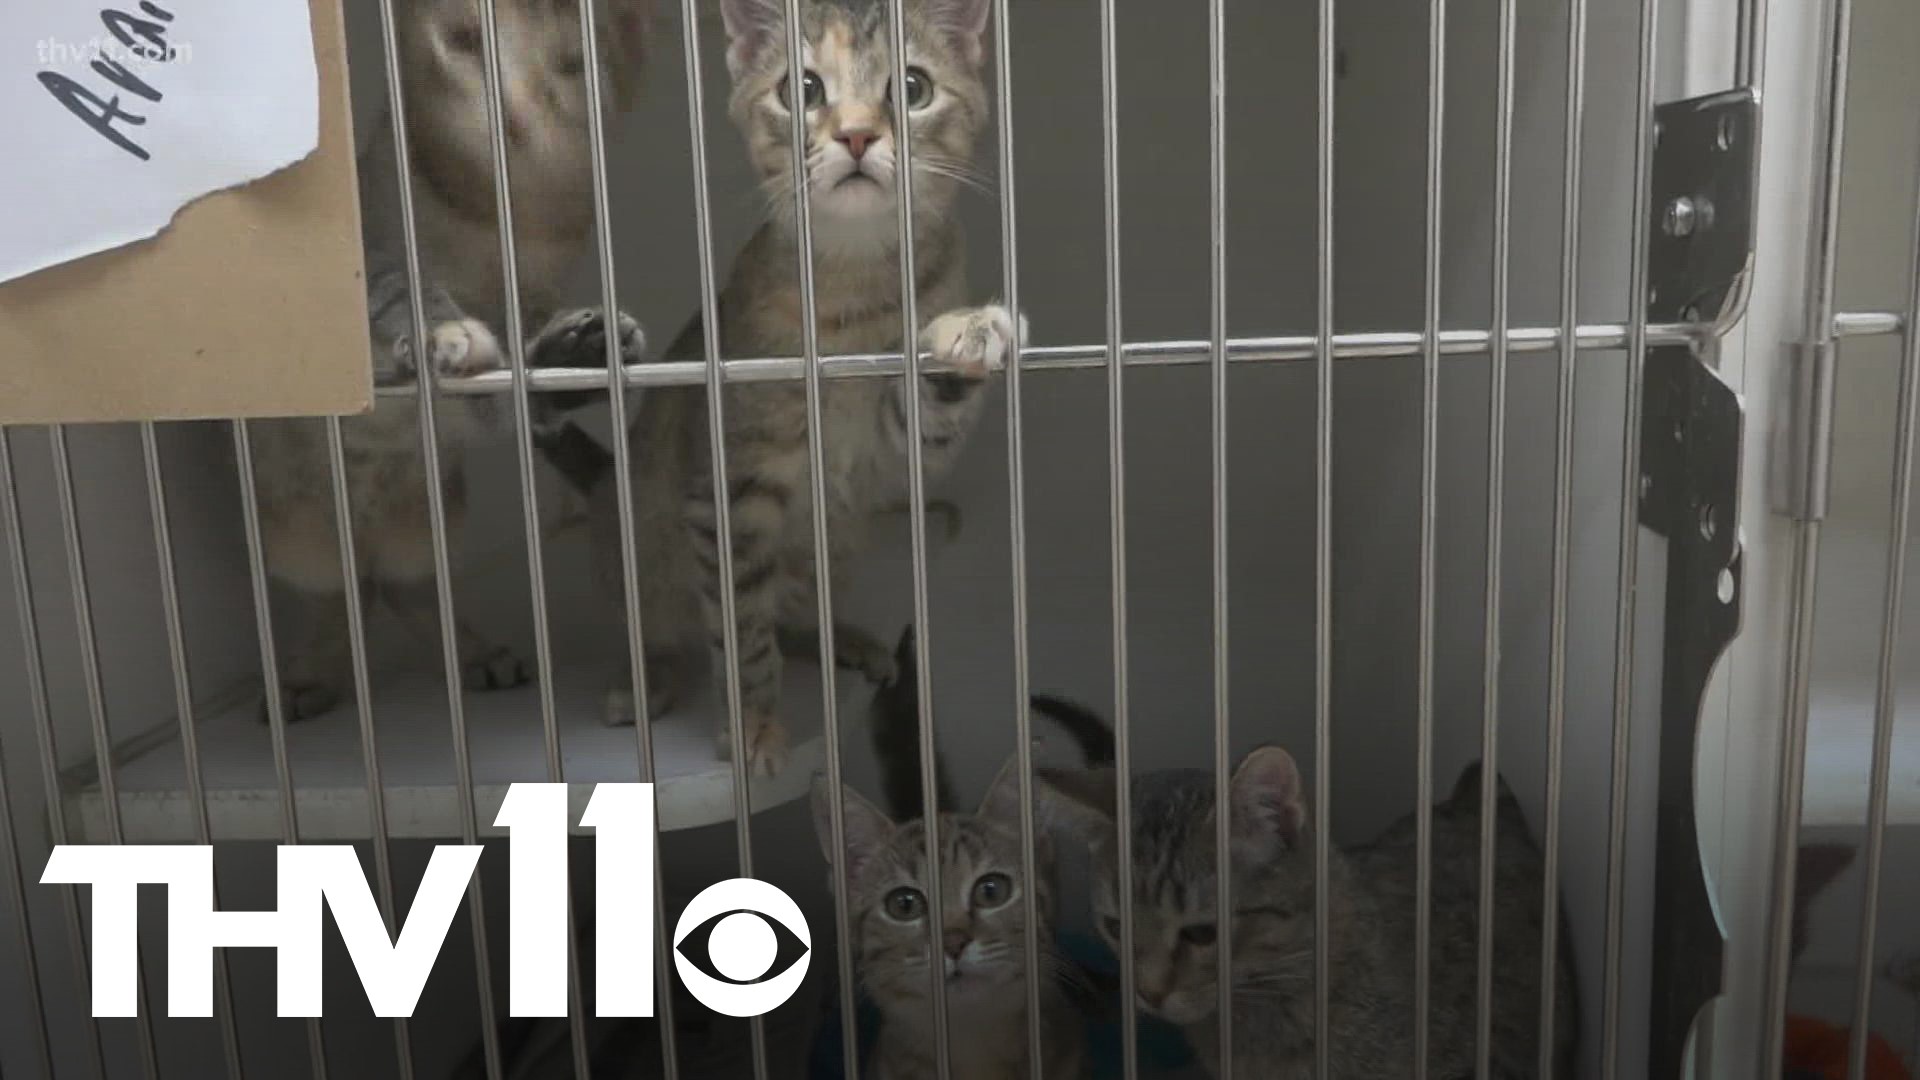 A foster organization is calling for more foster homes for animals in central Arkansas after having to euthanize a dozen cats and dogs Wednesday.